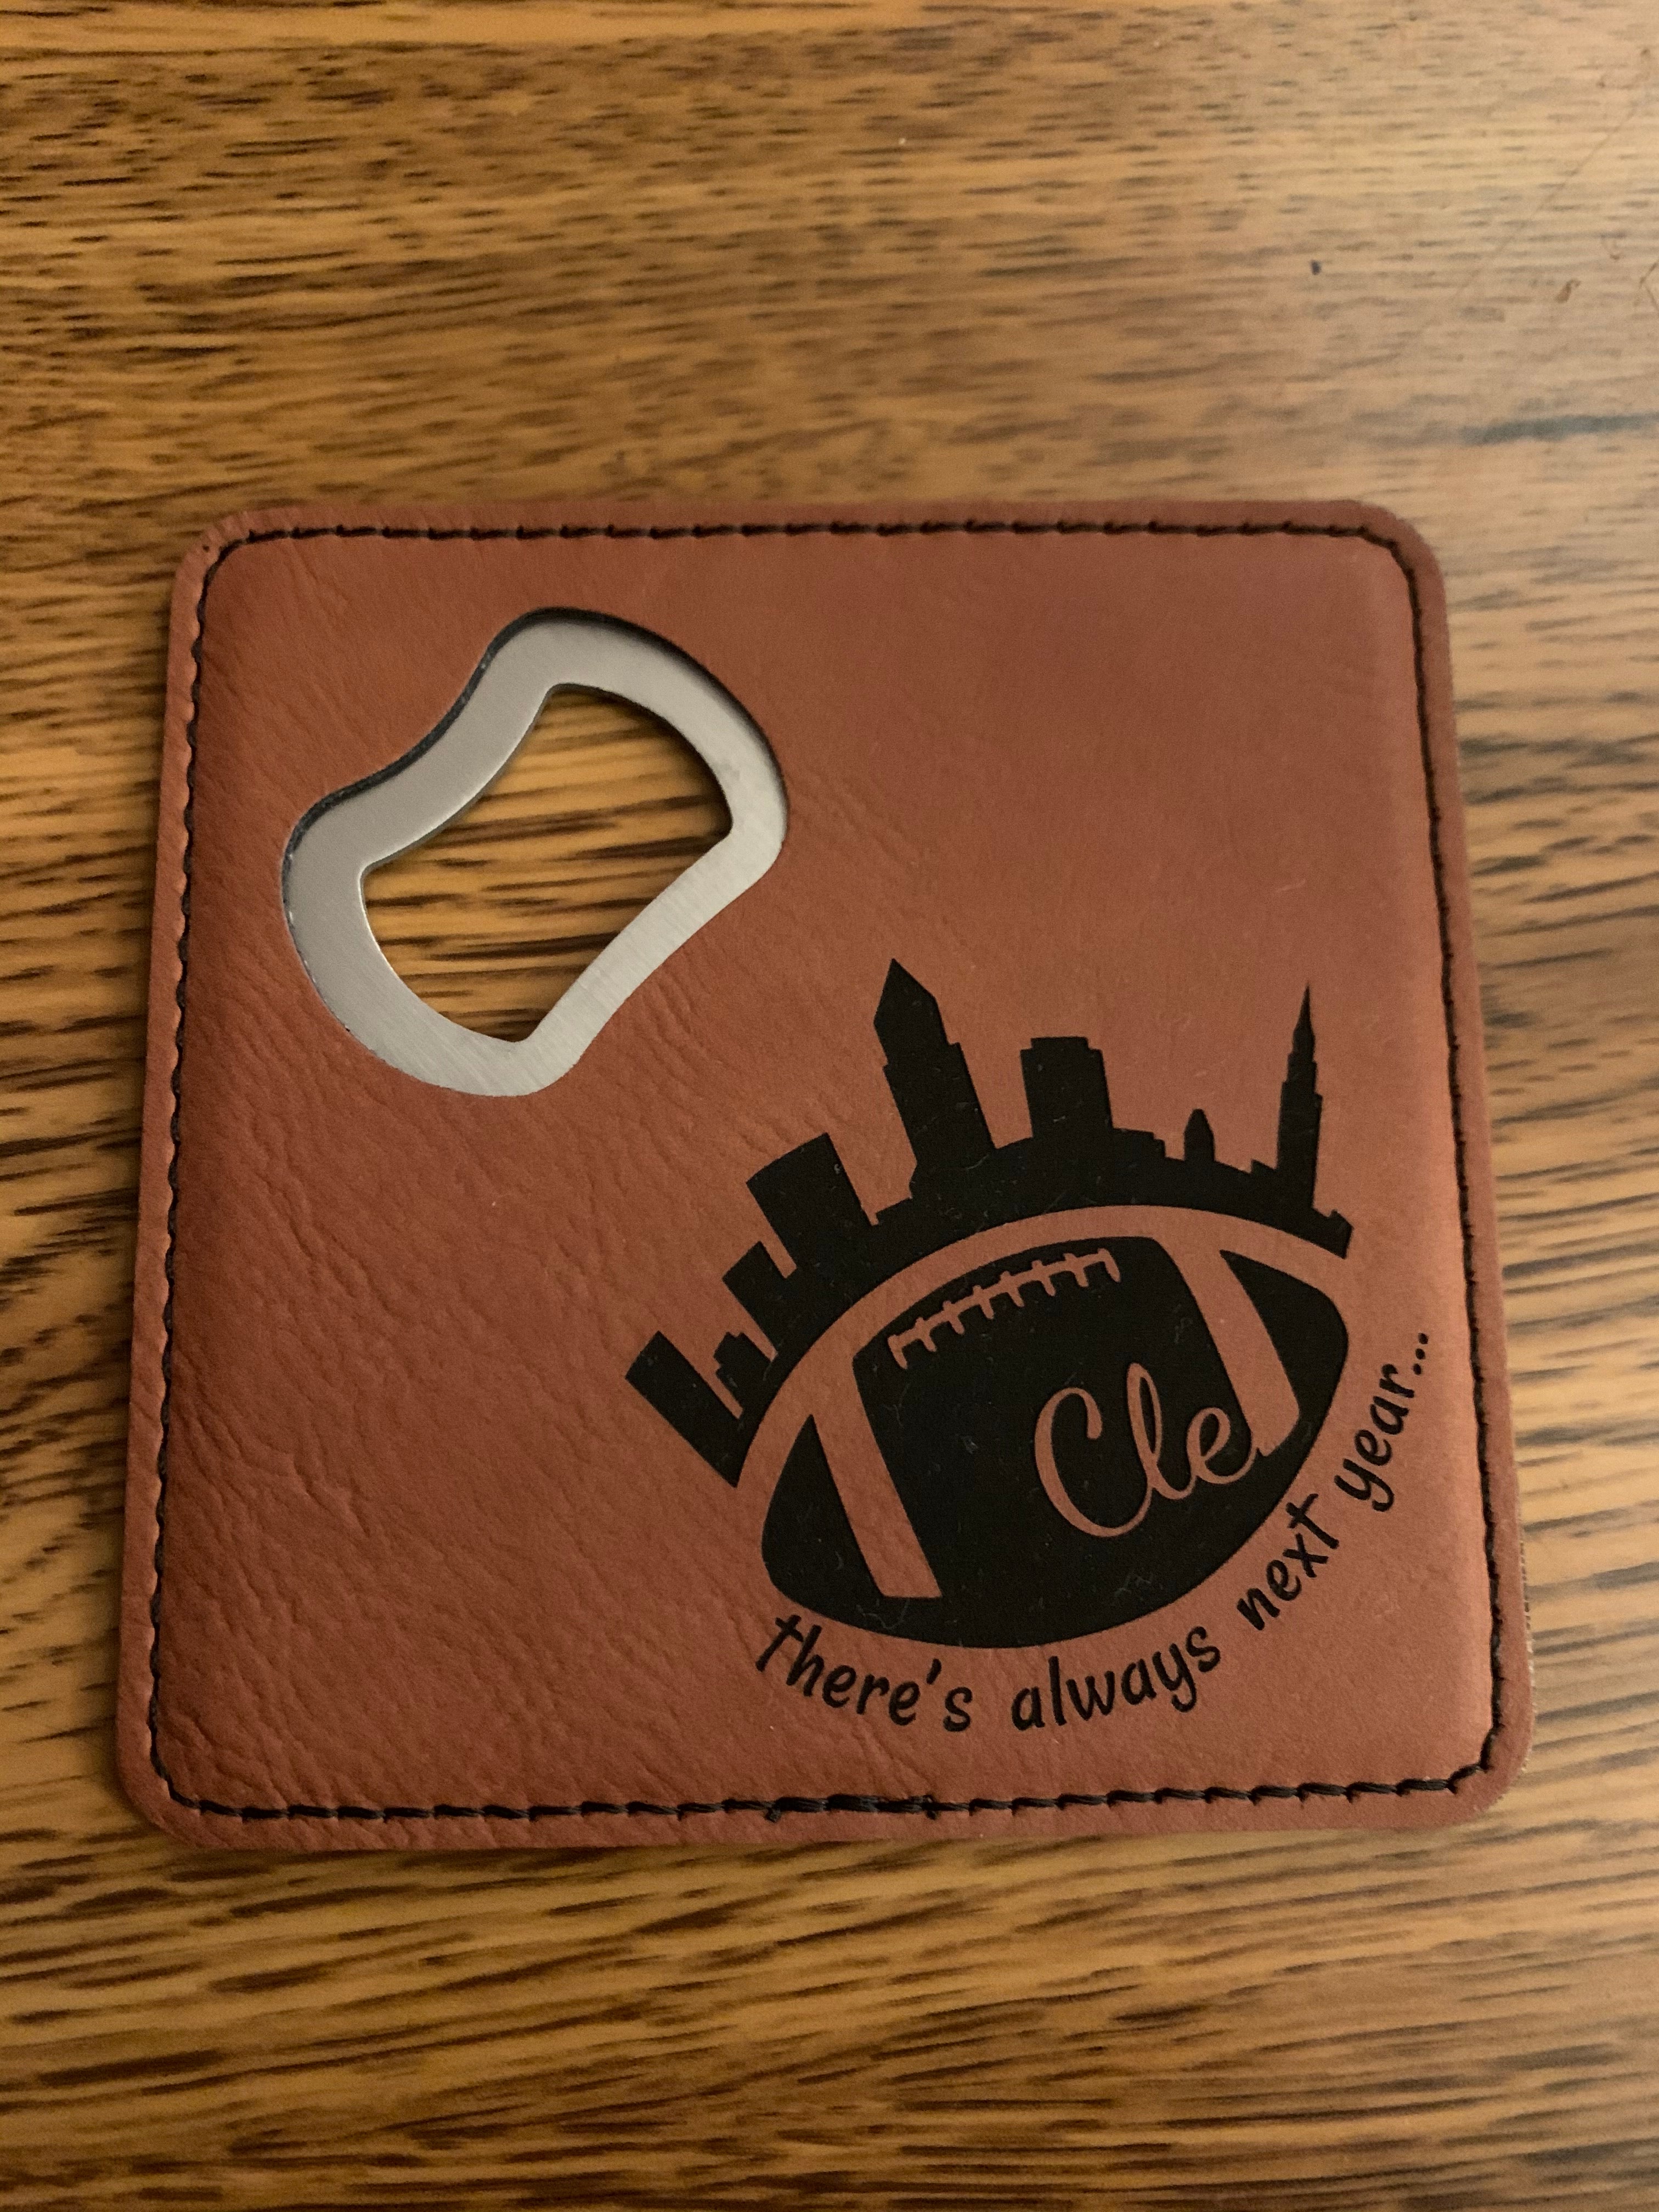 Cleveland Themed Bottle Openers / Coasters